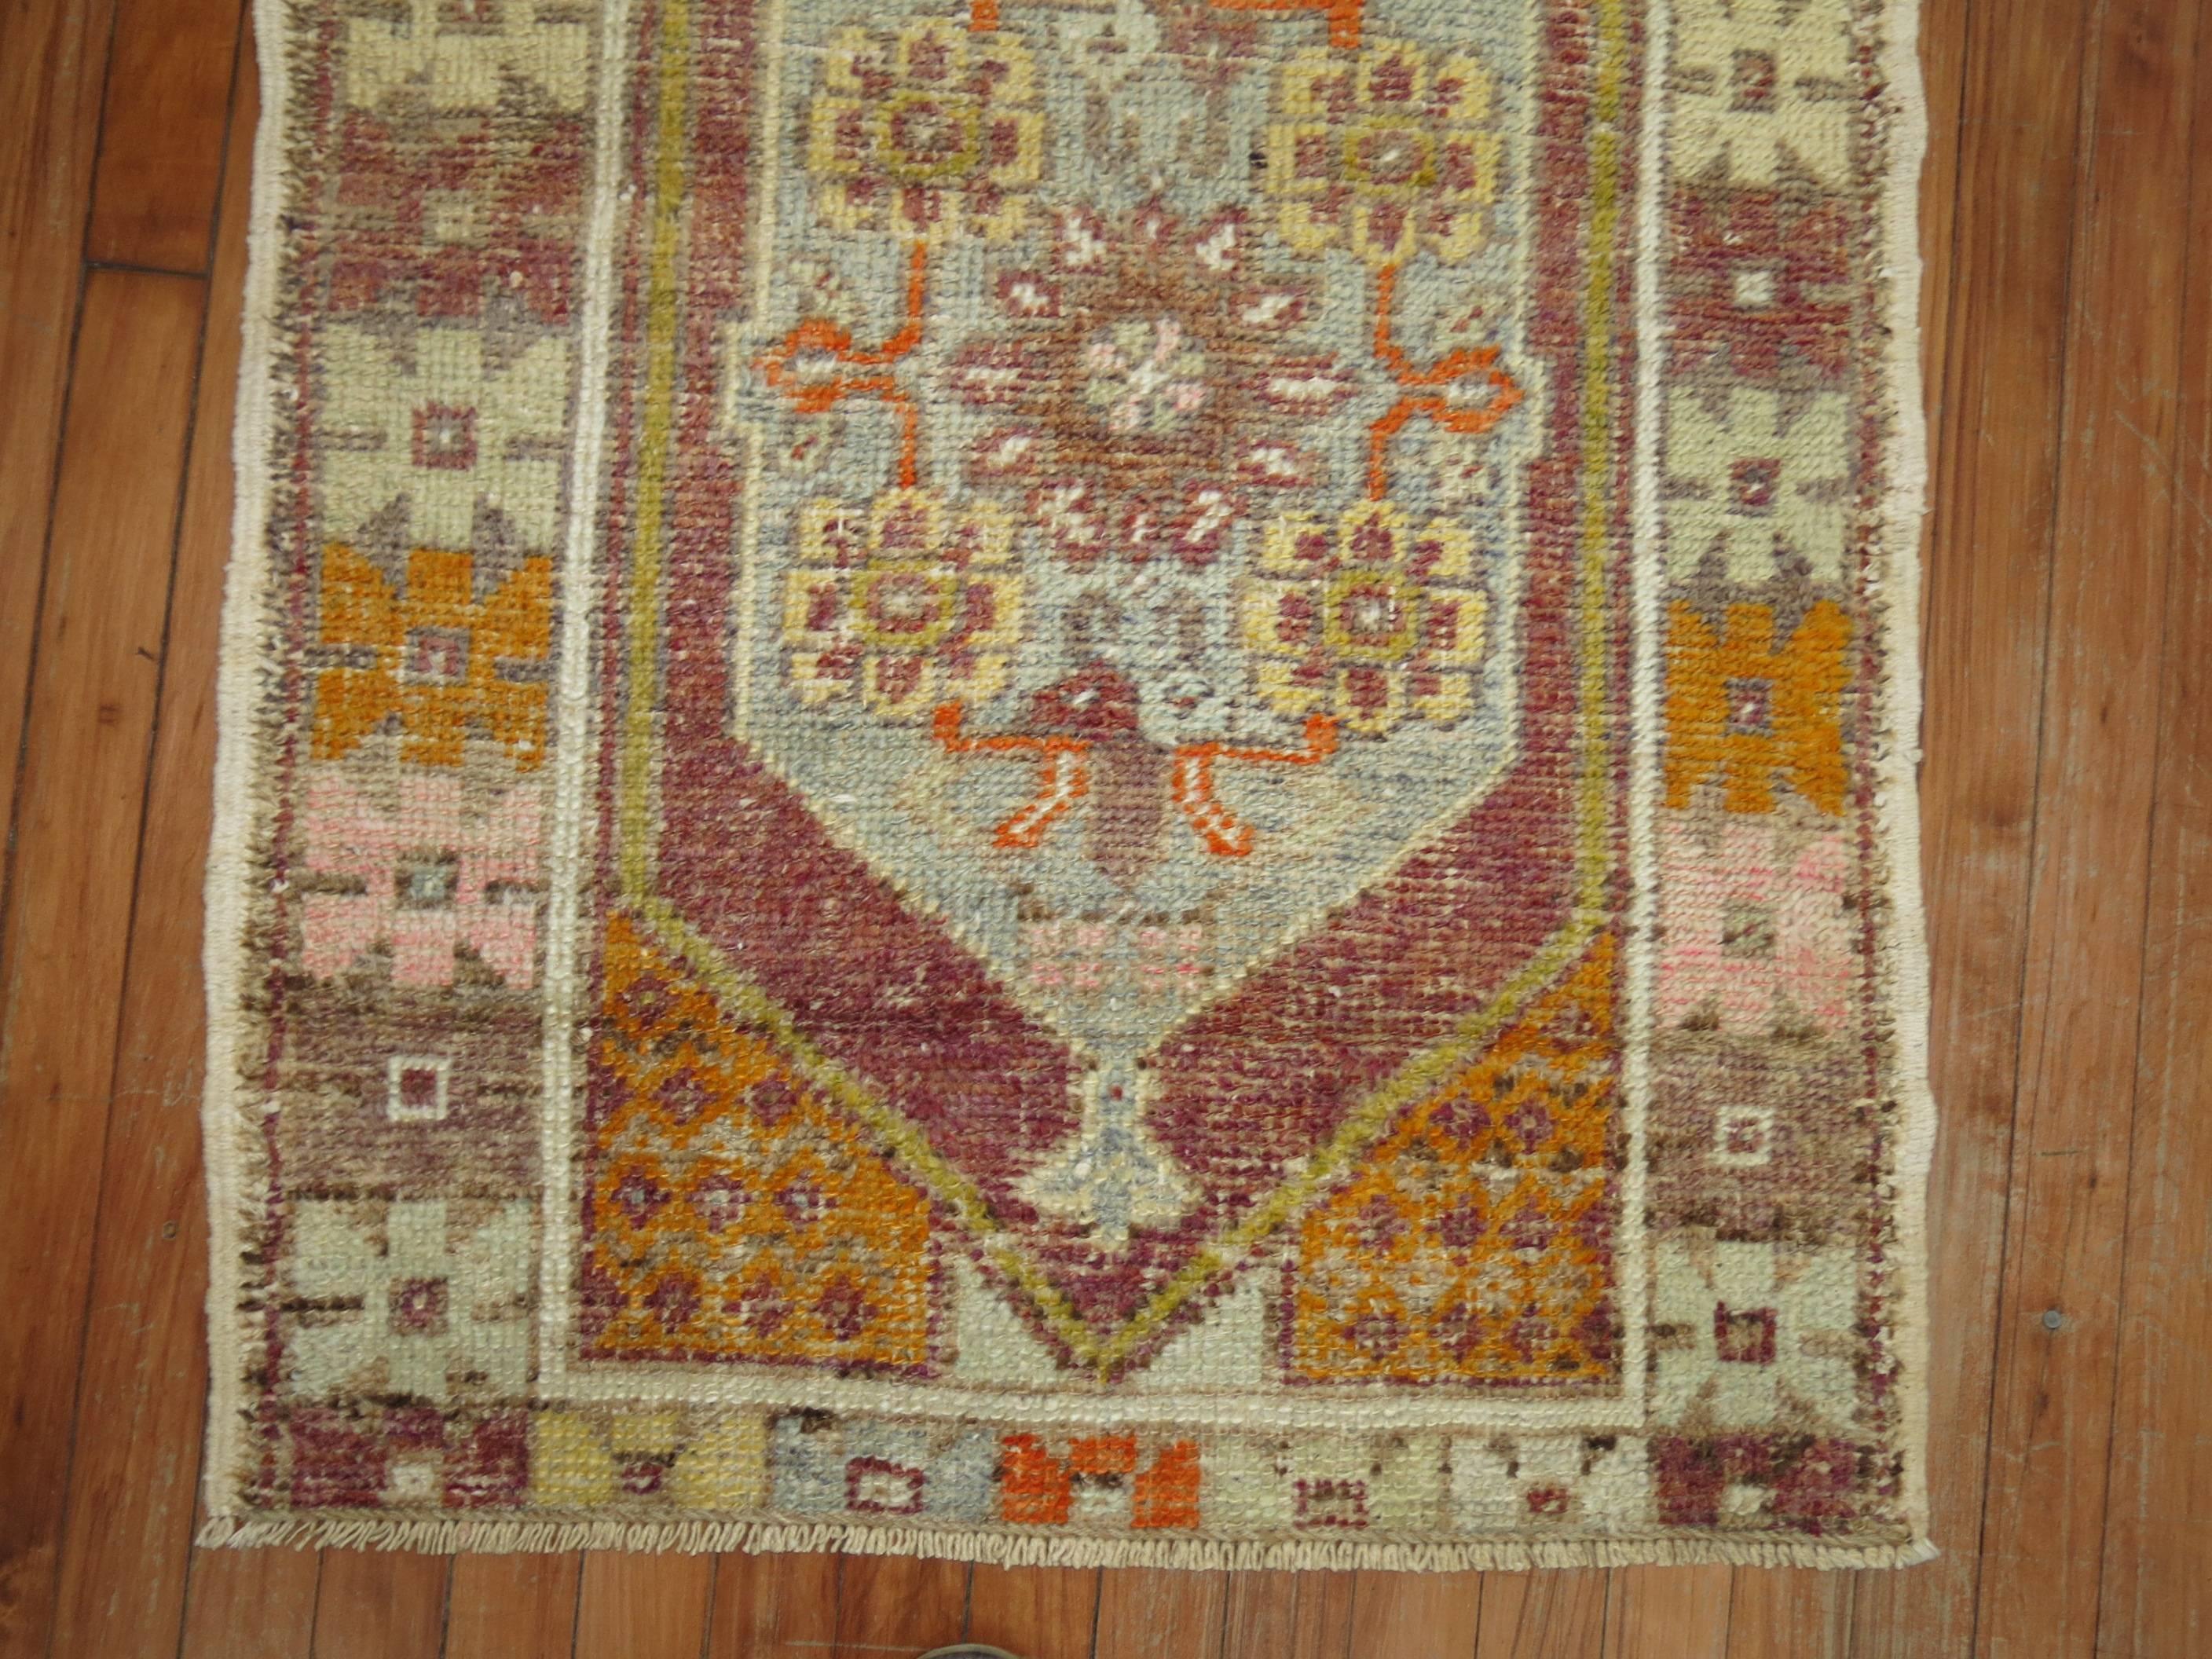 A vintage Turkish Anatolian scatter rug from the middle stages of the 20th century.